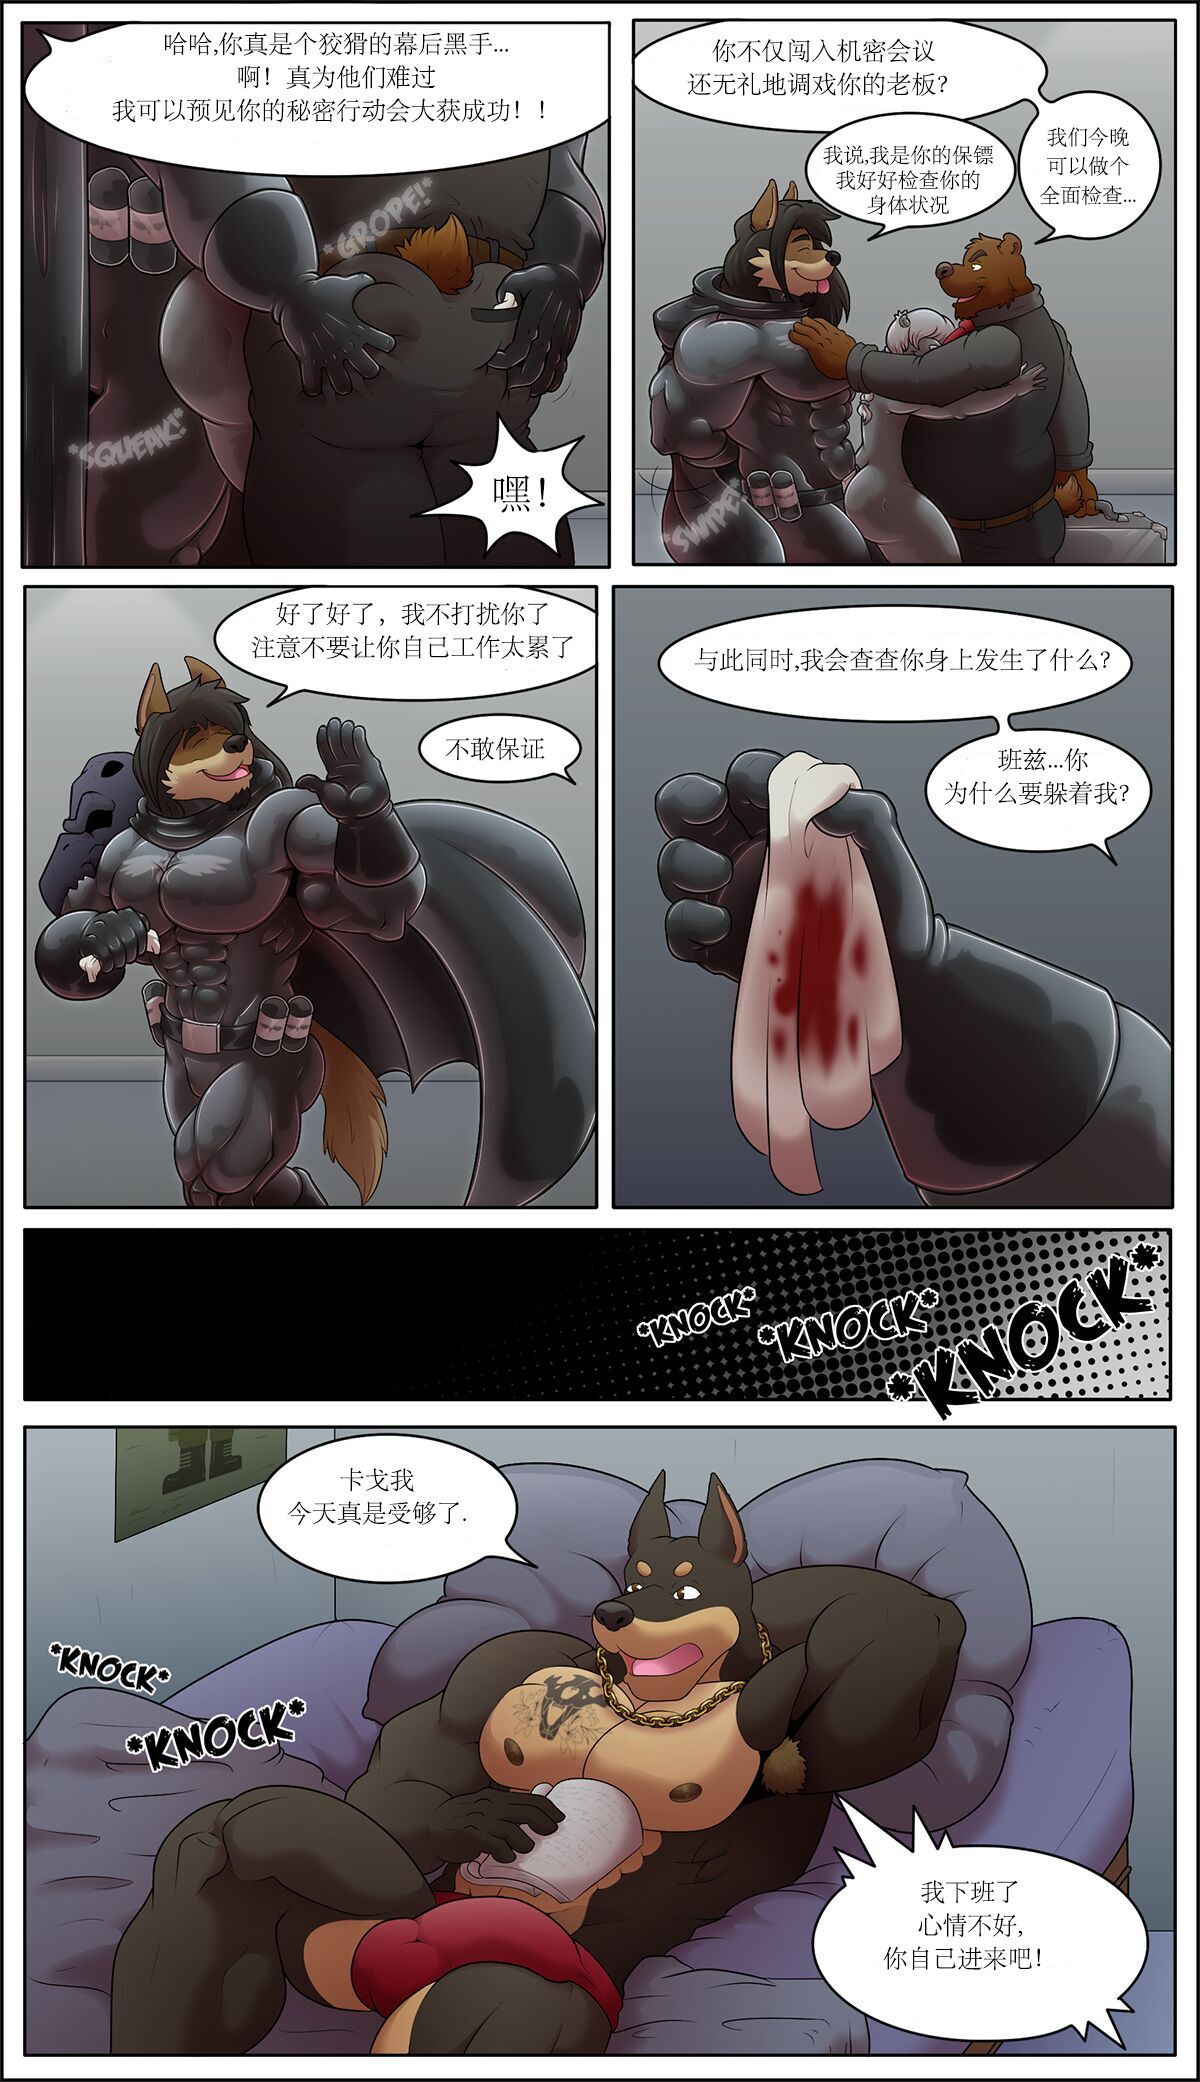 [Rubberbuns] Convergence (Ongoing)[chinese] 